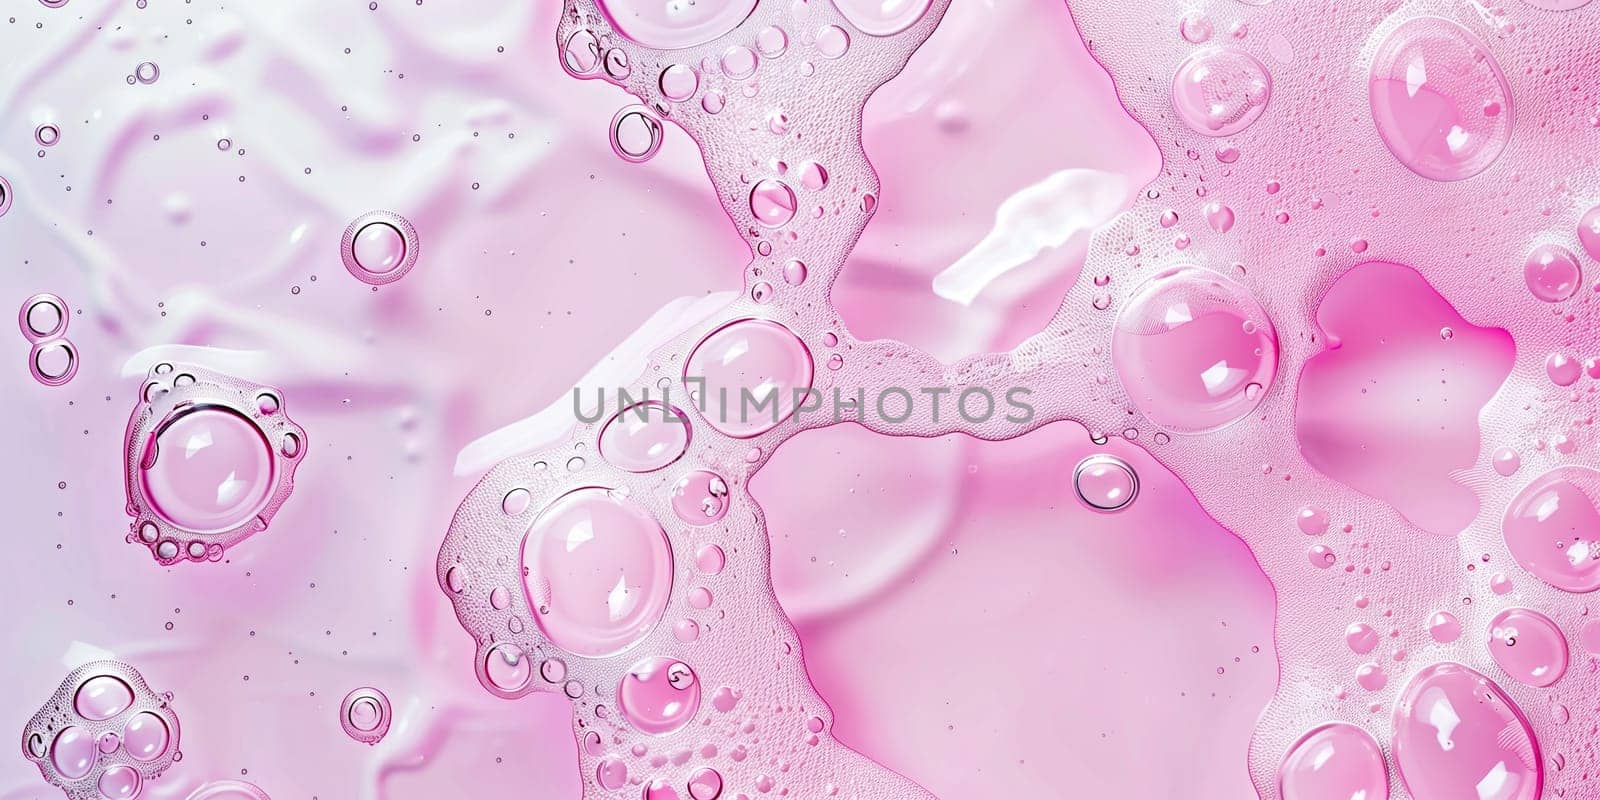 Pink gel texture. Cosmetic clear liquid cream smudge. Transparent skin care product sample closeup. Hand sanitizer, alcohol gel background